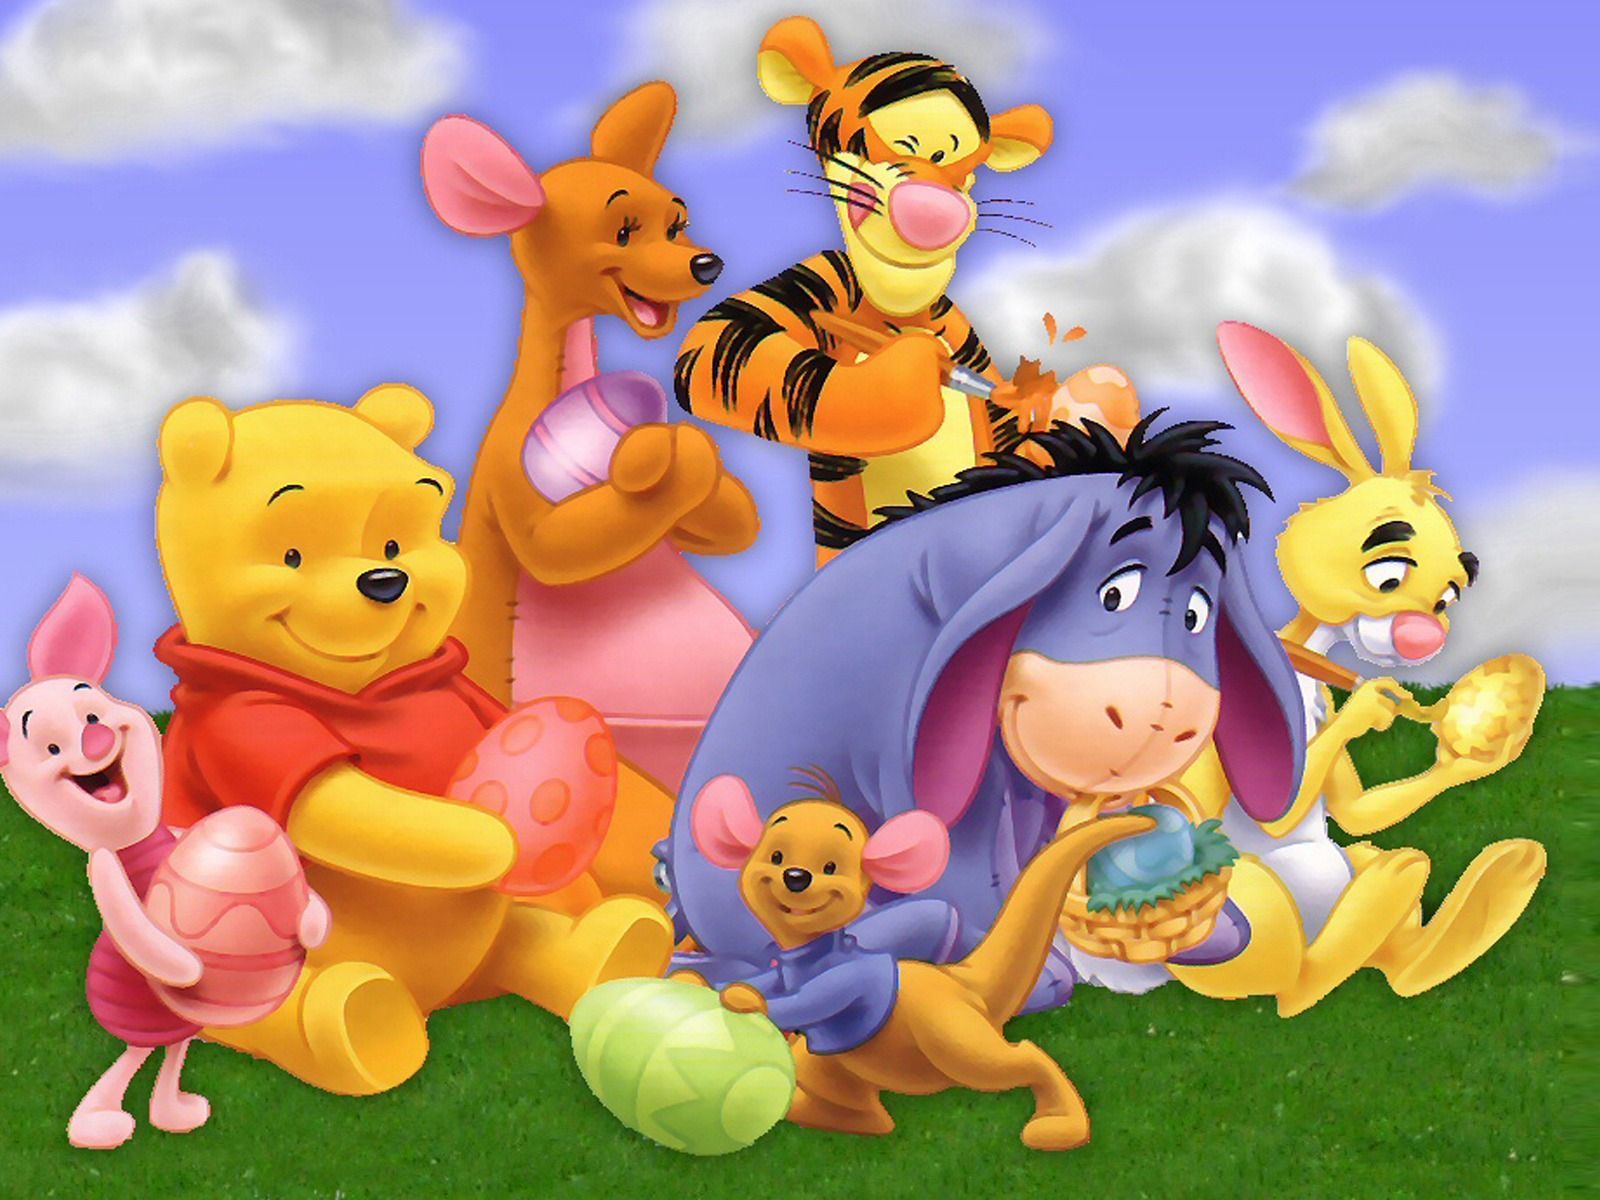 Winnie the pooh character s on